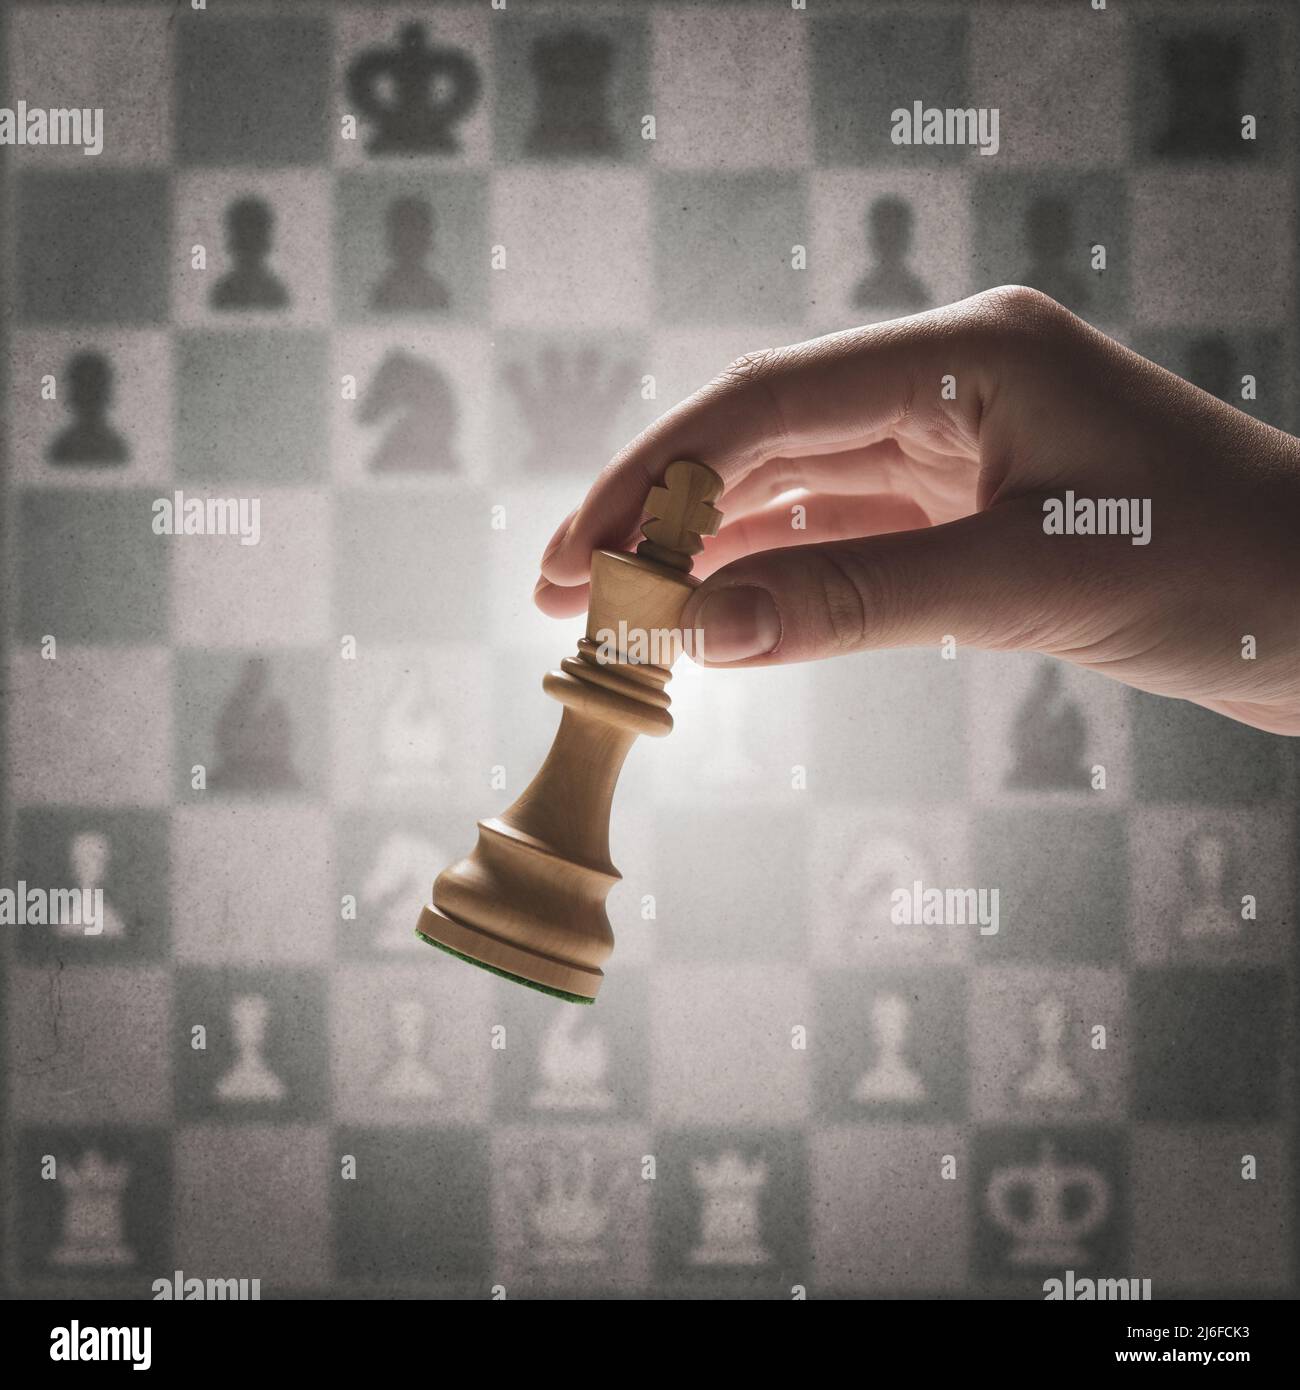 graphic, chess, Analysis, Business, line, strategy, set icon